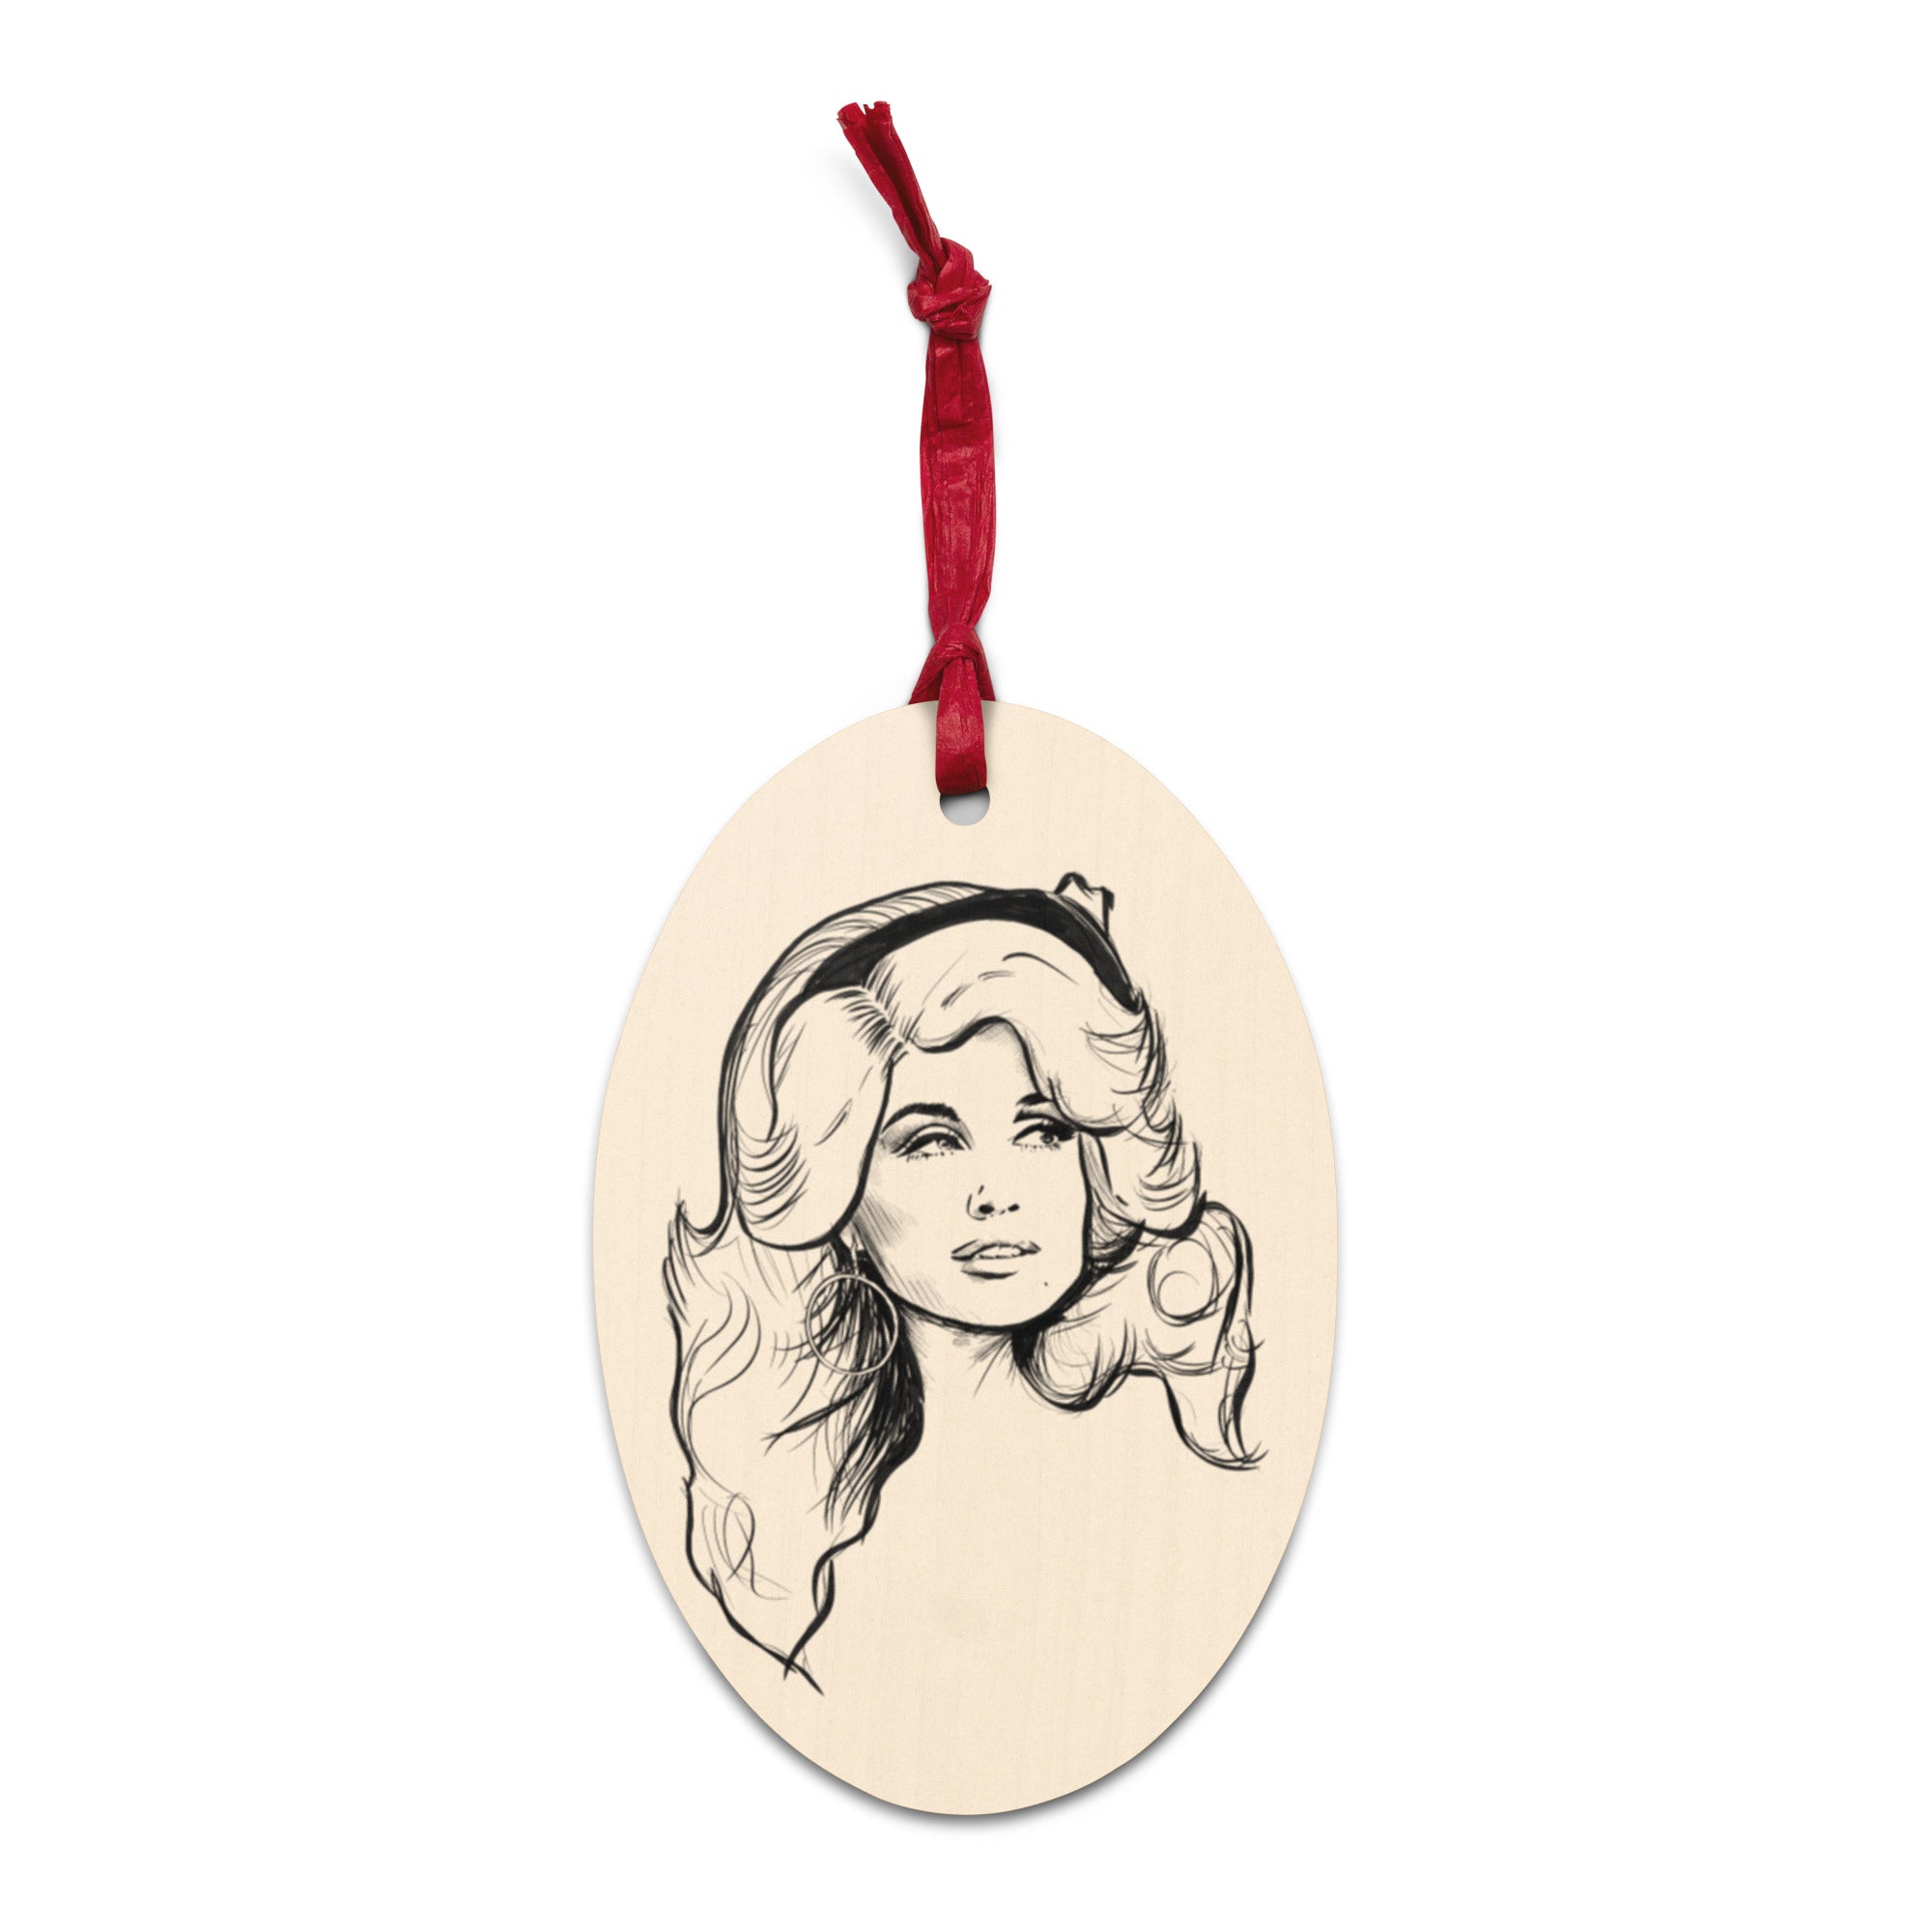 Dolly Parton Line Art Printed Vintage Style Wooden Christmas Tree Holiday Ornament - Retro Pink Print Back